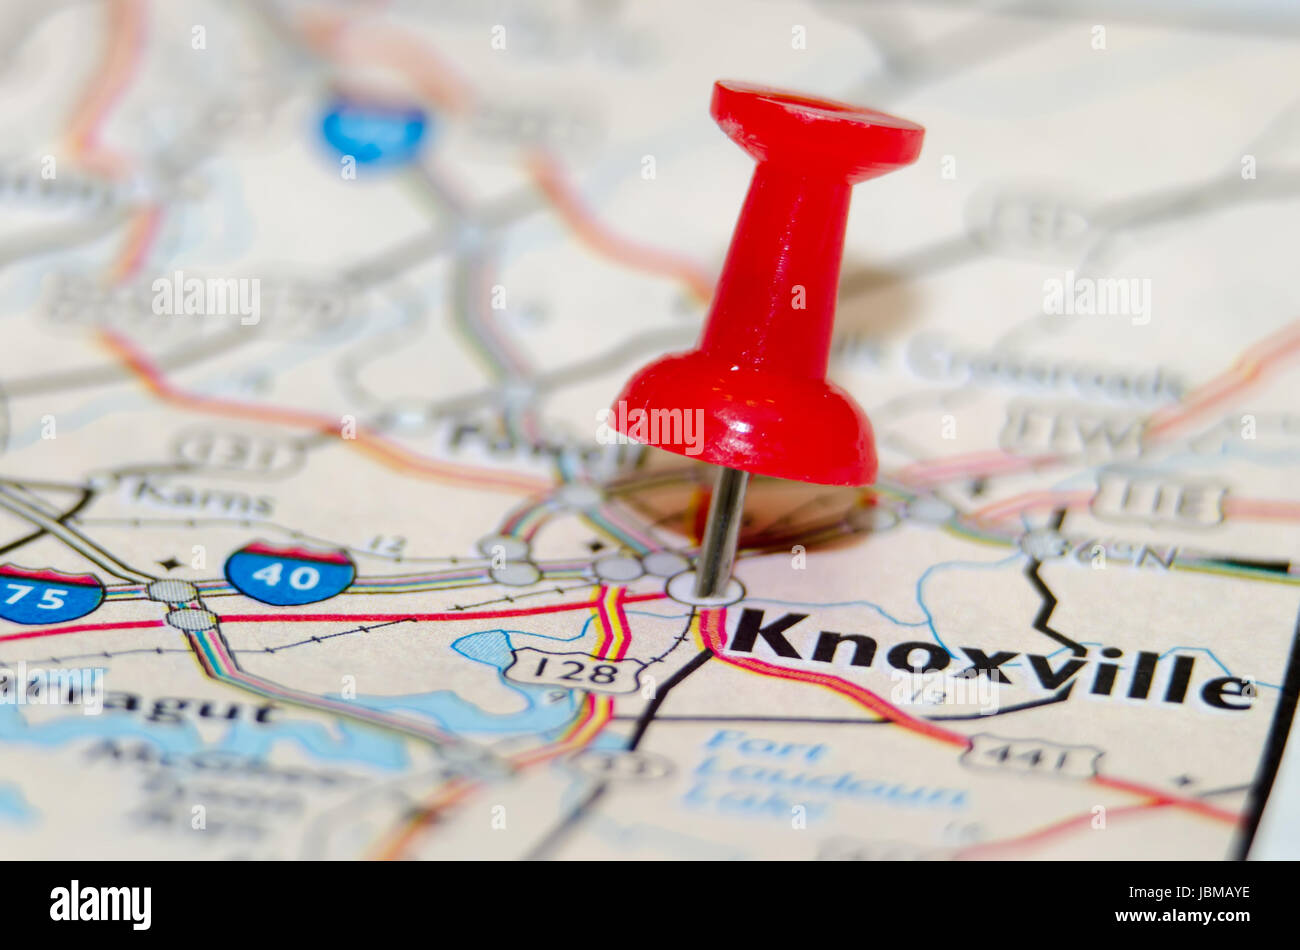 knoxville city pin on the map Stock Photo